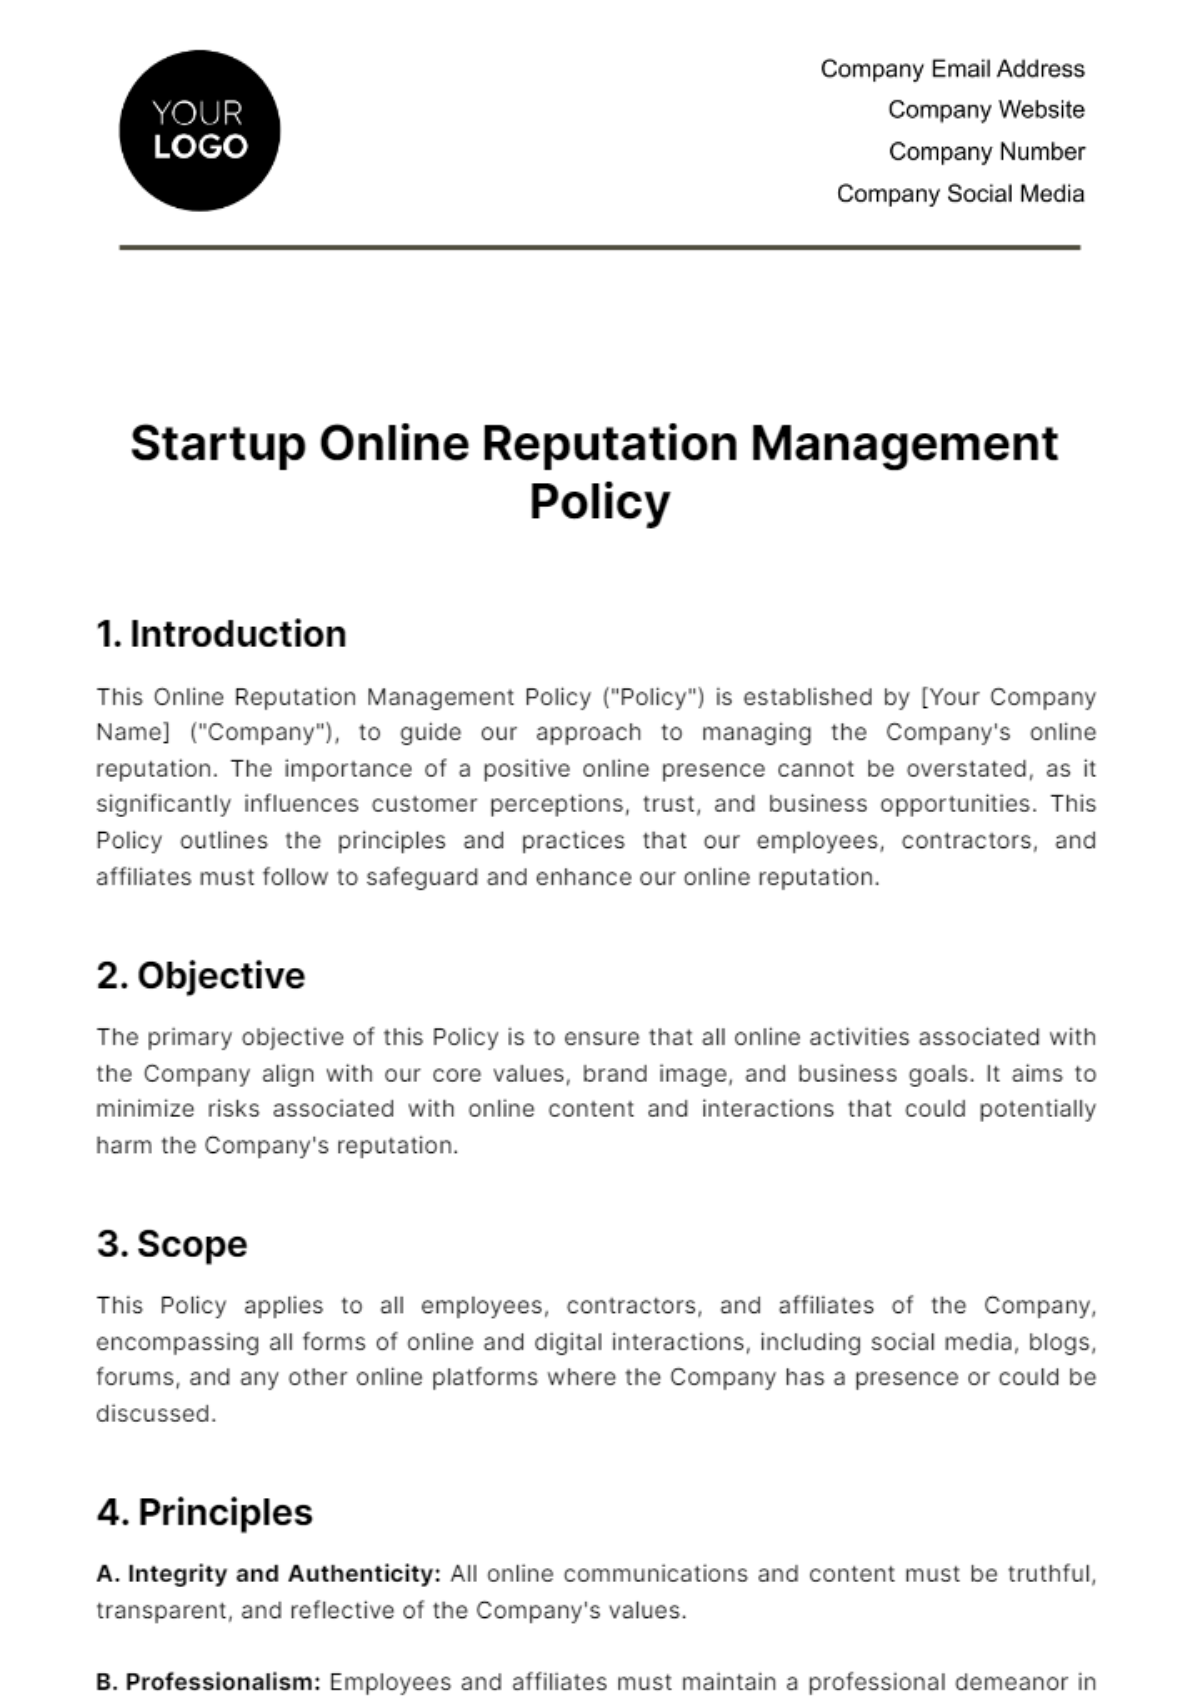 Startup Online Reputation Management Policy Template